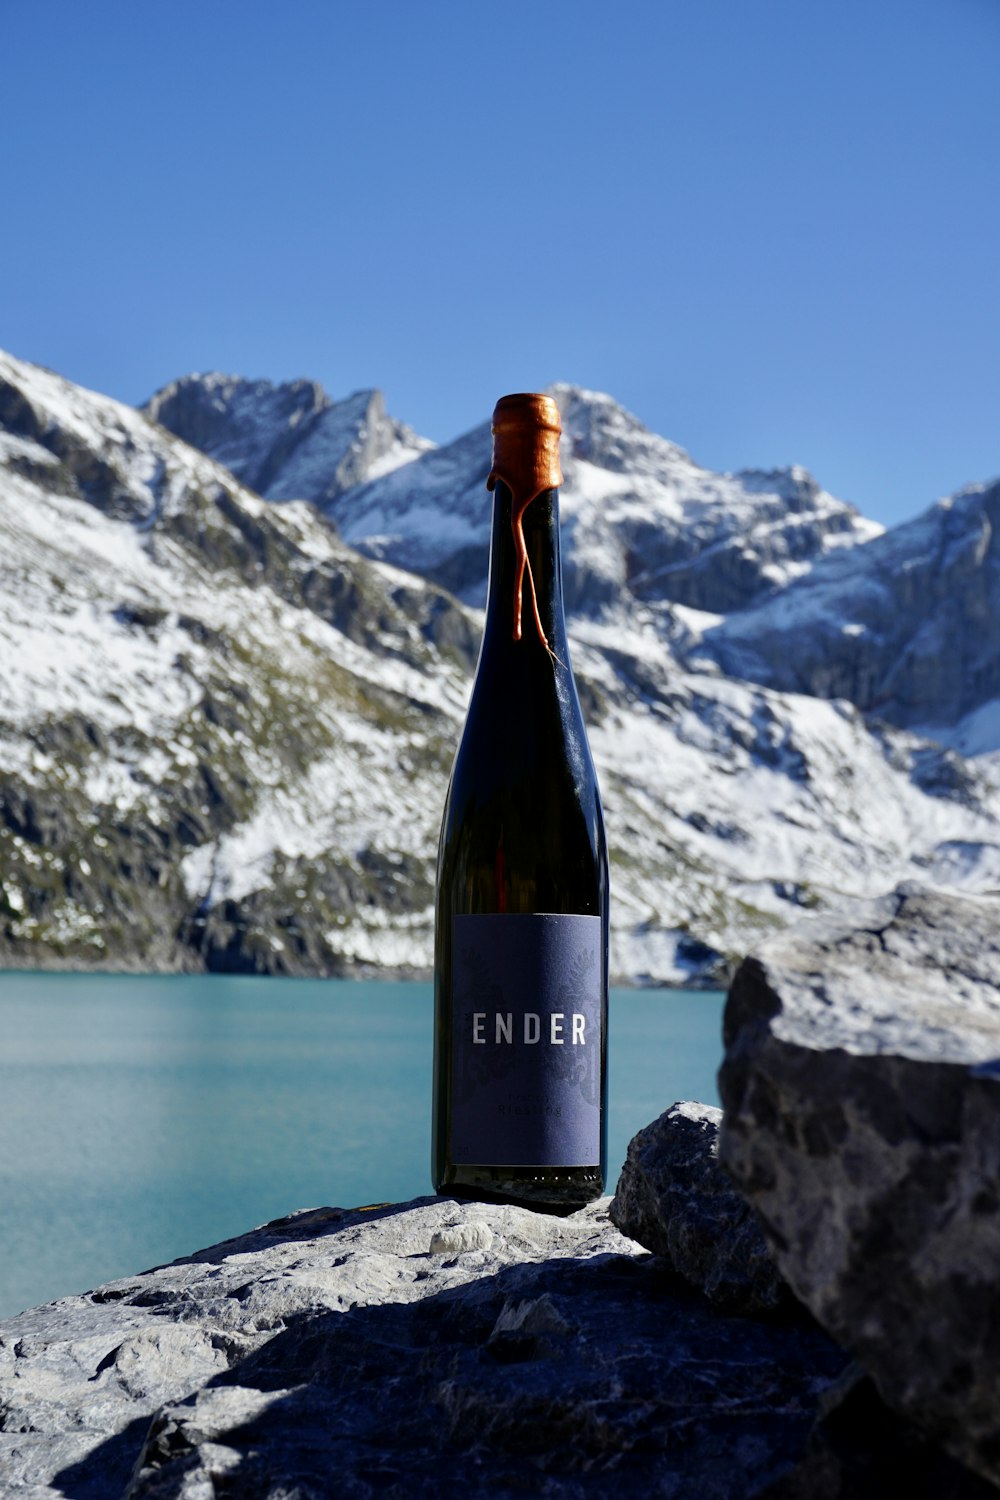 a bottle of wine on a rocky surface with mountains in the background